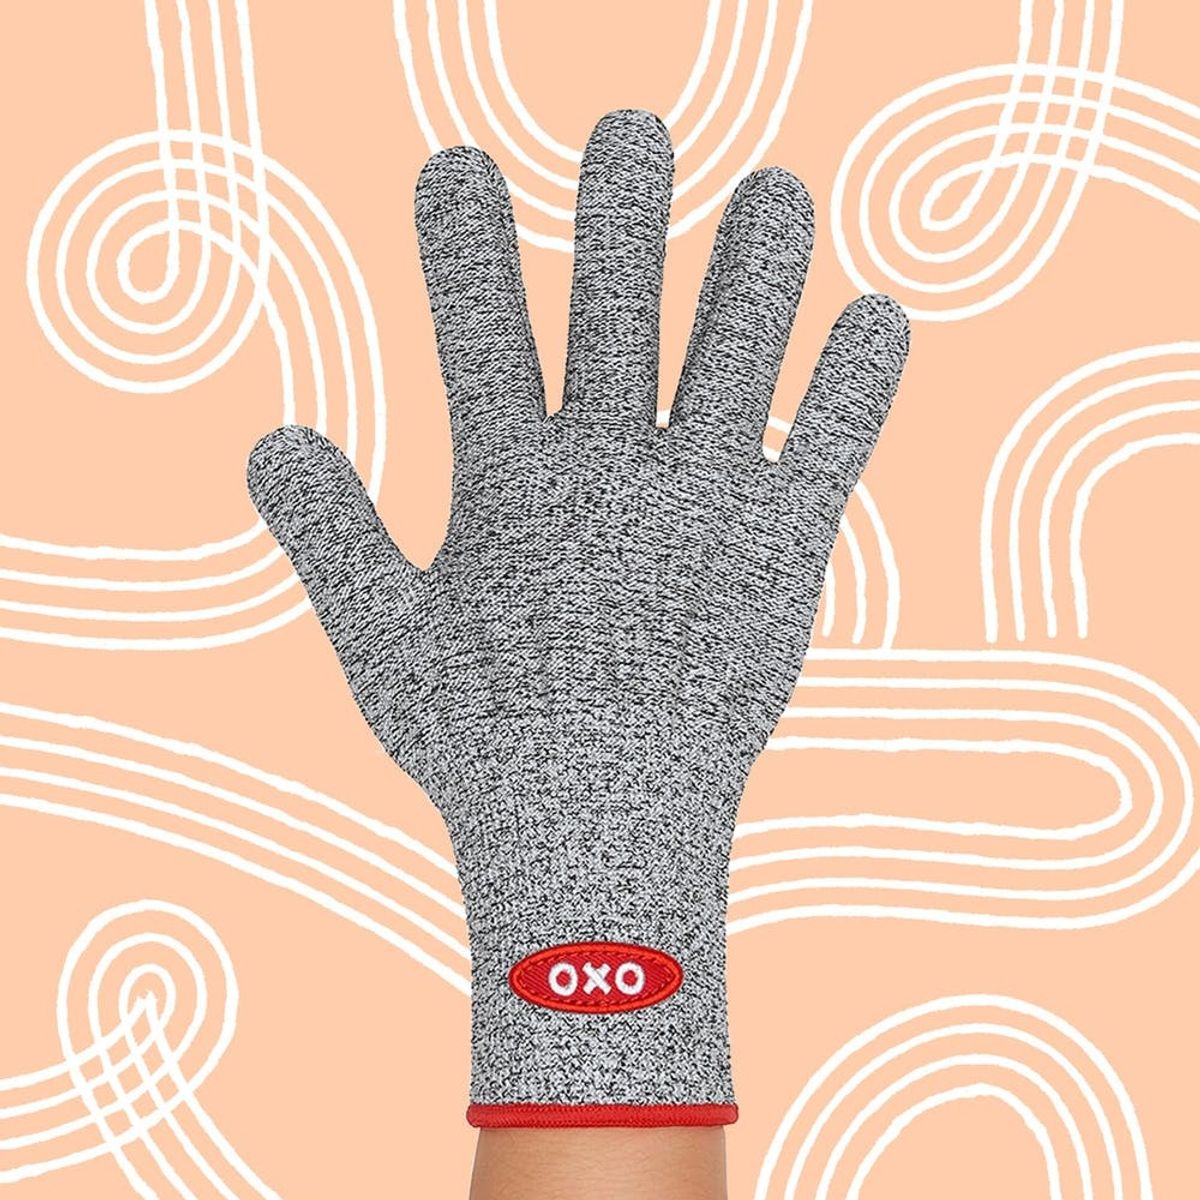 Prevent All the Kitchen-Related Injuries With This Glove